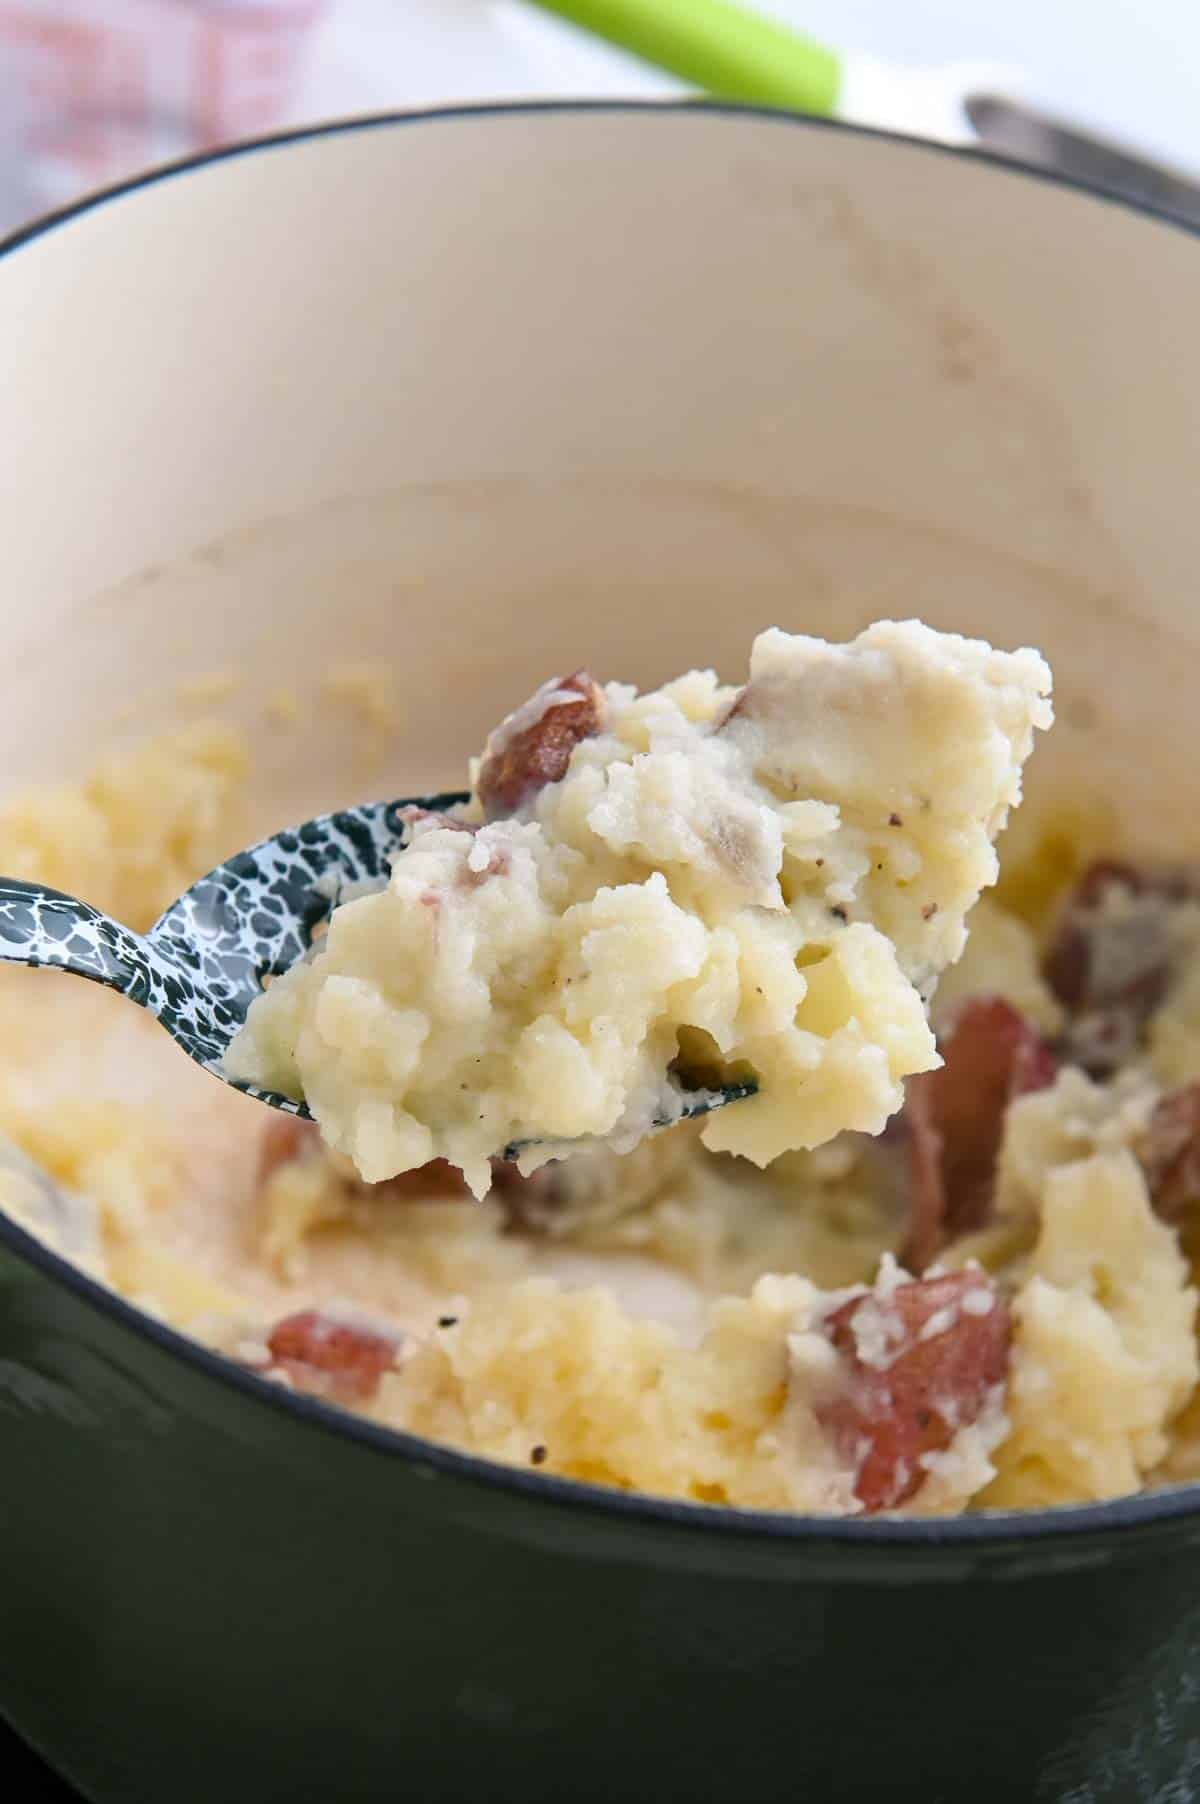 Blue specked metal spoon lifting a serving of mashed potatoes from a Dutch oven.